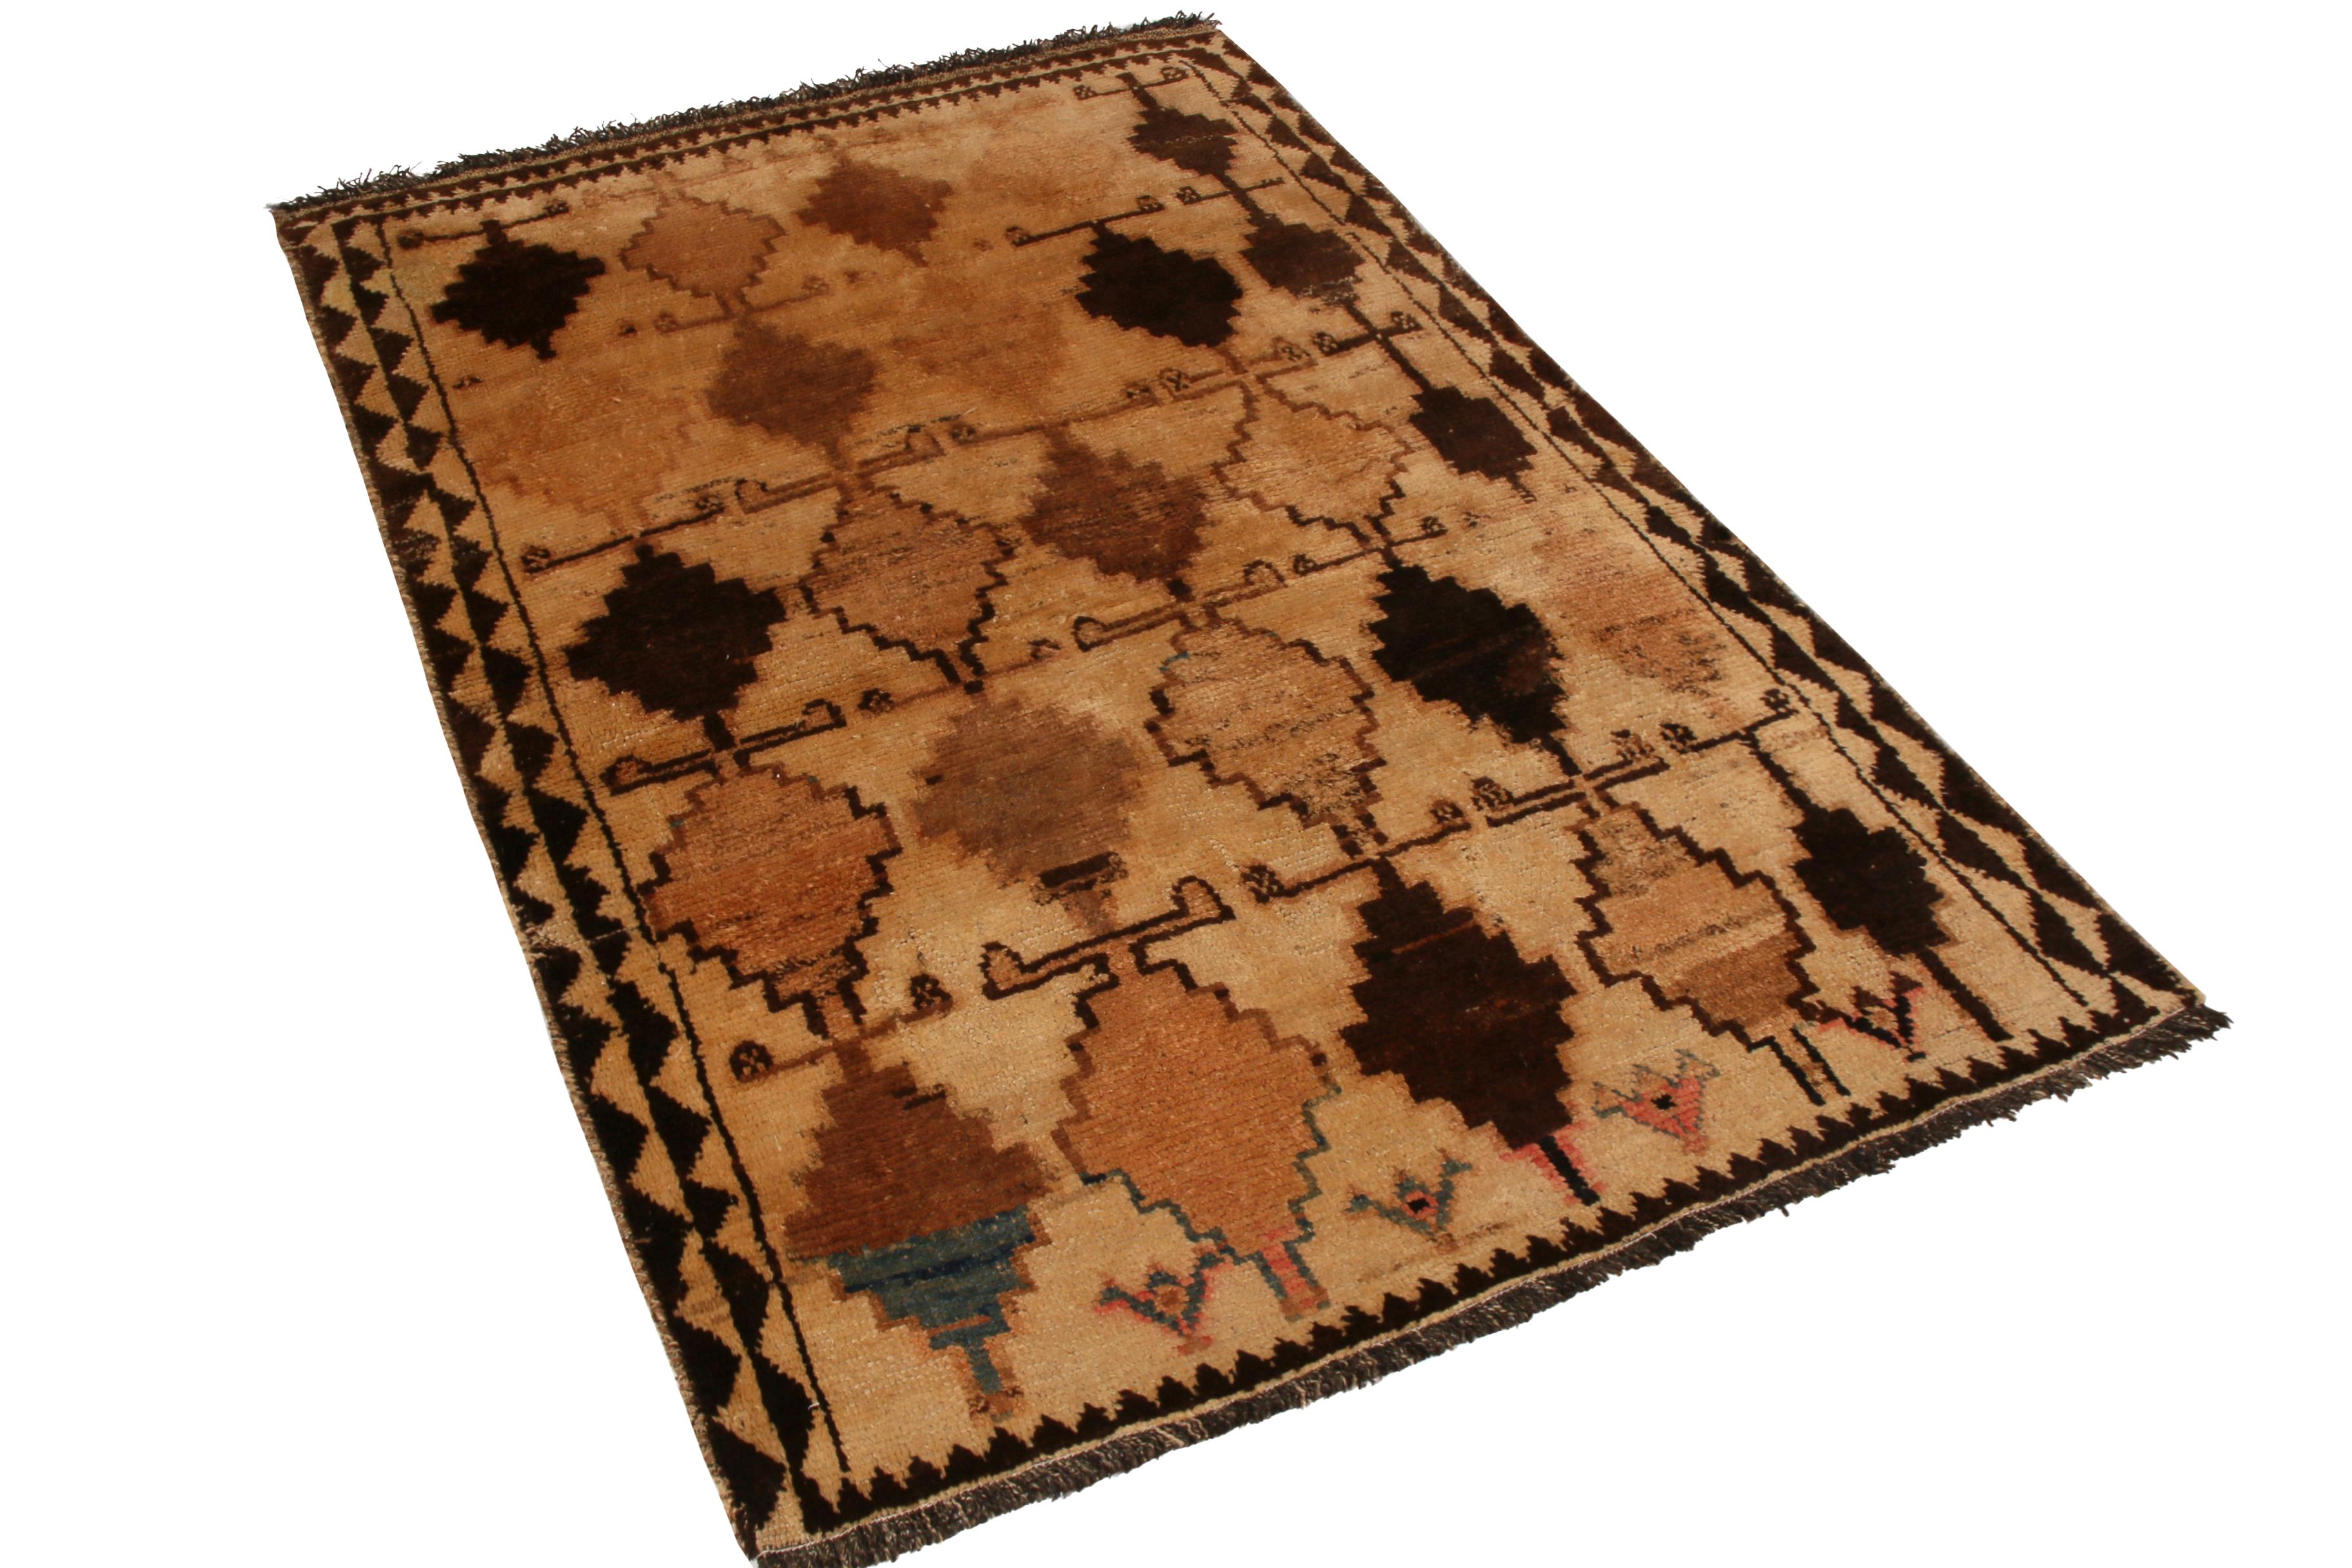 Hand knotted in wool originating from the Gabbeh tribal weavers circa 1950-1960, this mid-century Persian rug enjoys a visually bold vintage diamond pattern with tasteful variations in definition complementing the array of beige-brown and black hues